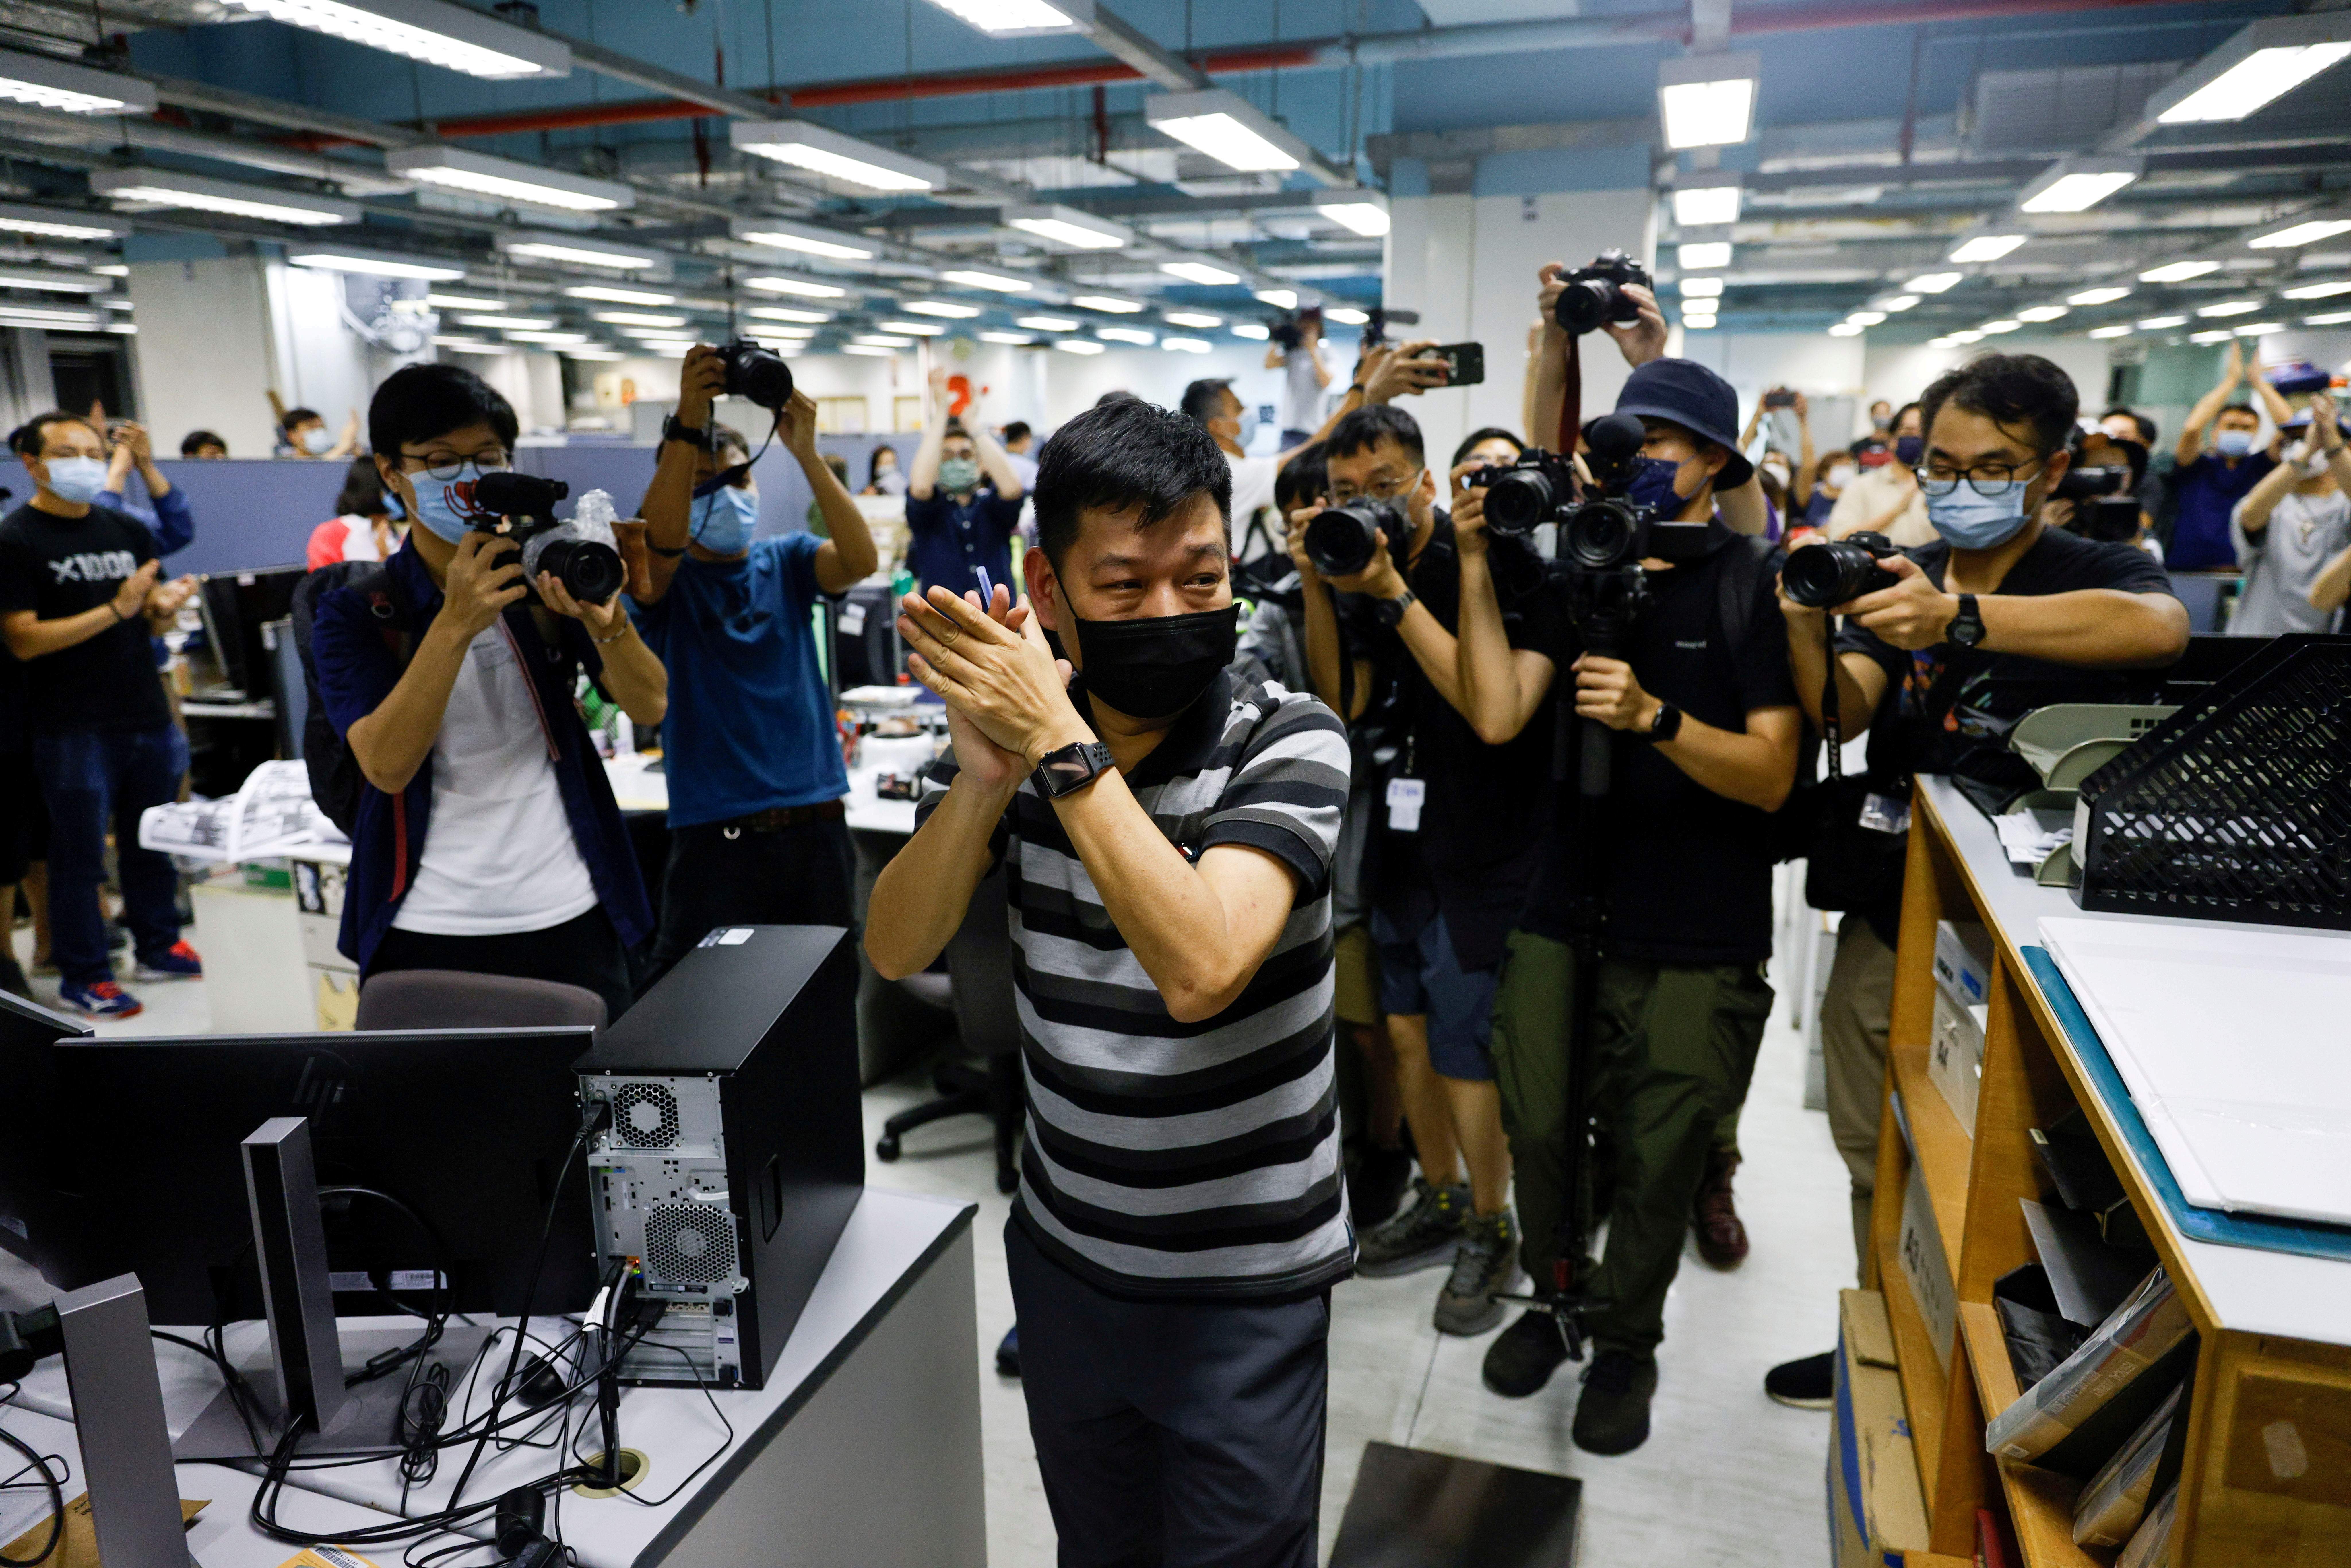 Lam Man-chung, Executive Editor-in-Chief of Apple Daily reacts on the day of the newspaper's final edition in Hong Kong, China June 23, 2021. REUTERS/Tyrone Siu